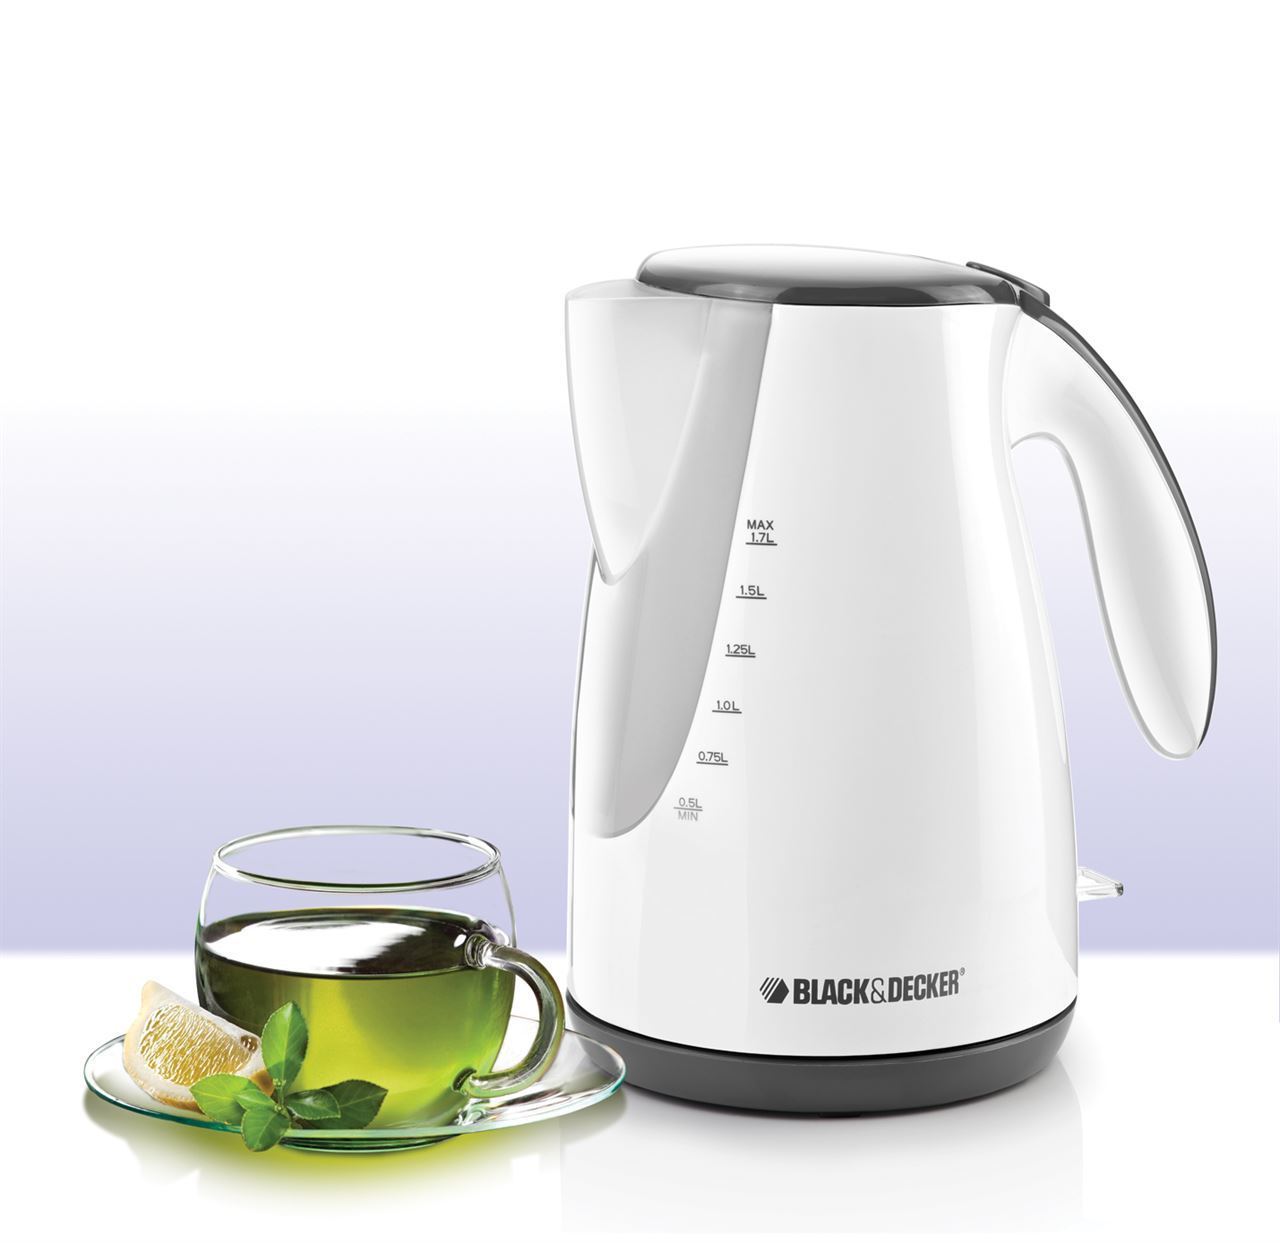 https://www.220stores.com/Shared/Images/Product/Black-And-Decker-1-8-Ltr-220V-JC72-Electric-Cordless-Kettle-220-Volt-for-Europe/JC72-6.jpg